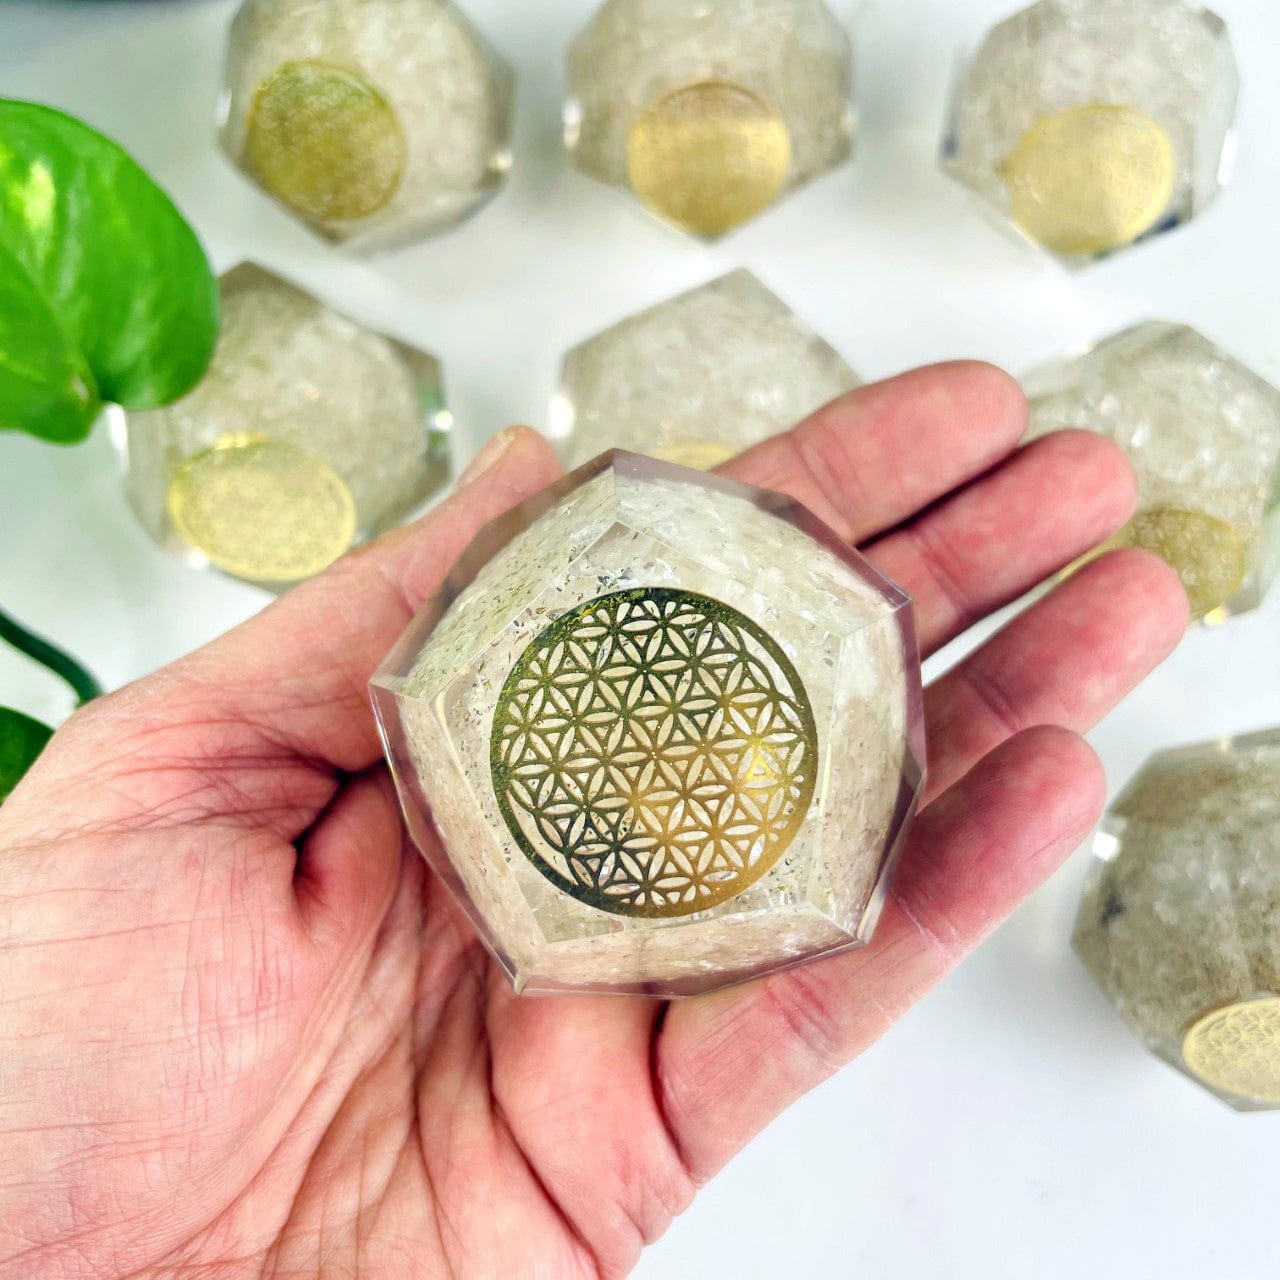 Orgone Energy - Crystal Quartz with Gold Flower of Life Grid - Dodecahedron shaped in hand